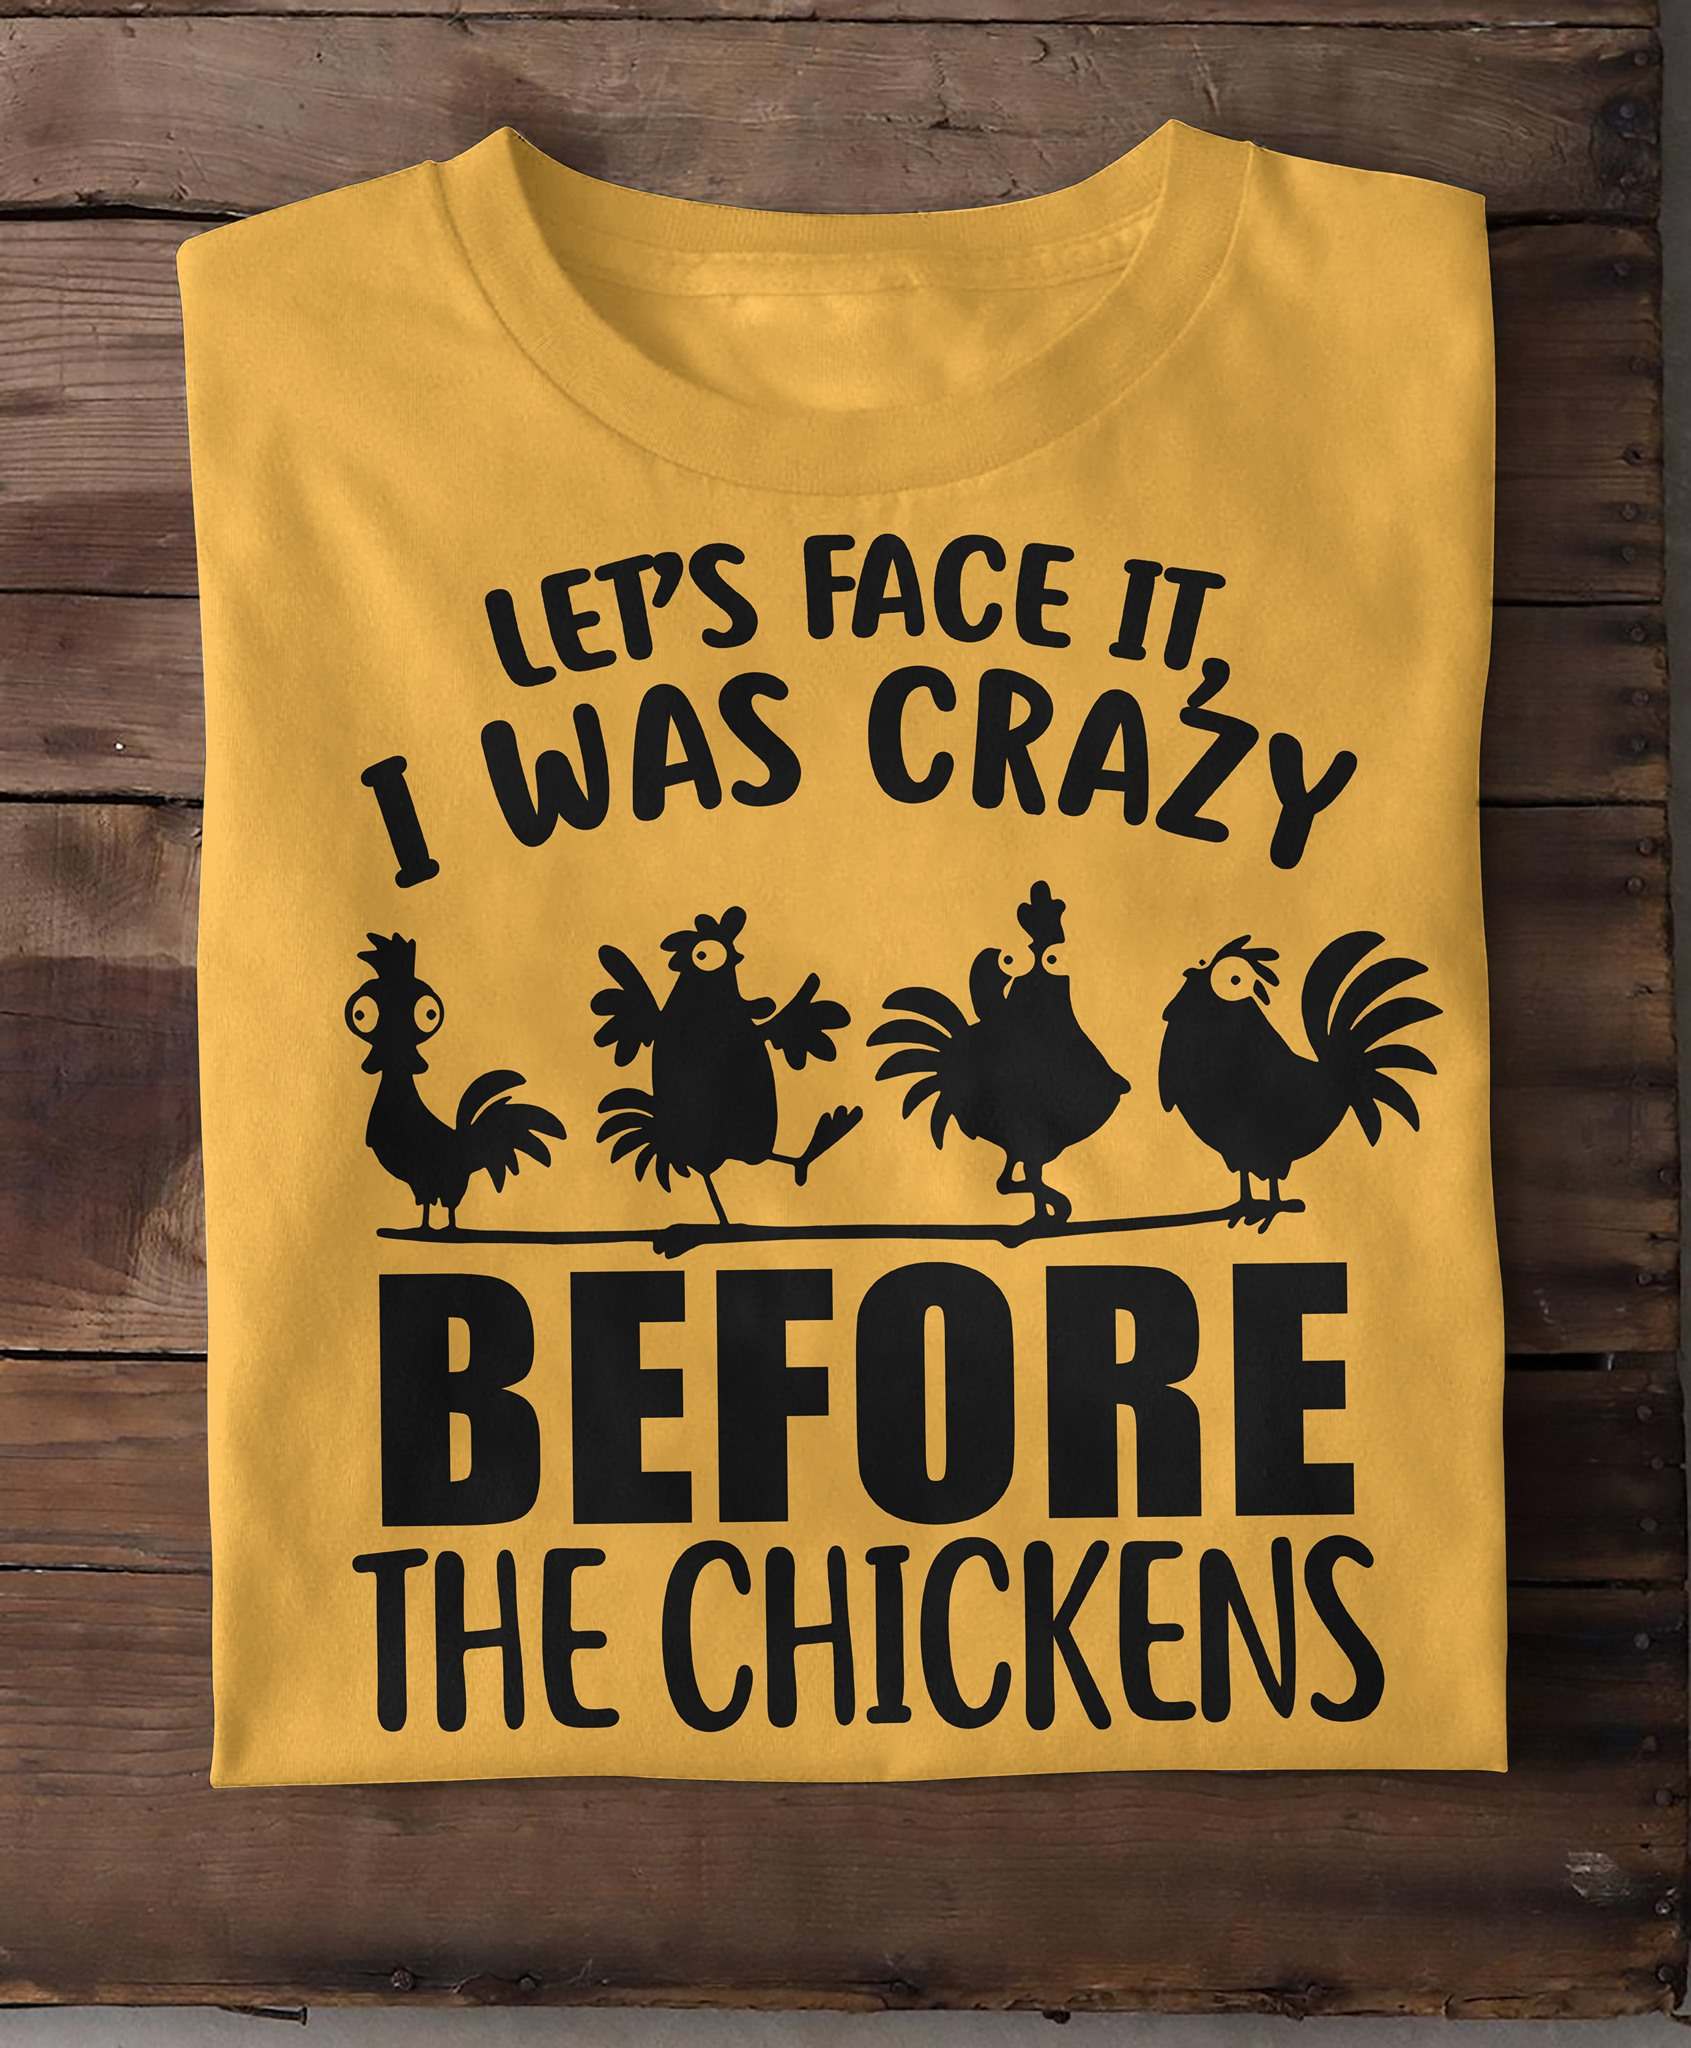 Crazy Chicken - Let's face it i was crazy before the chickens